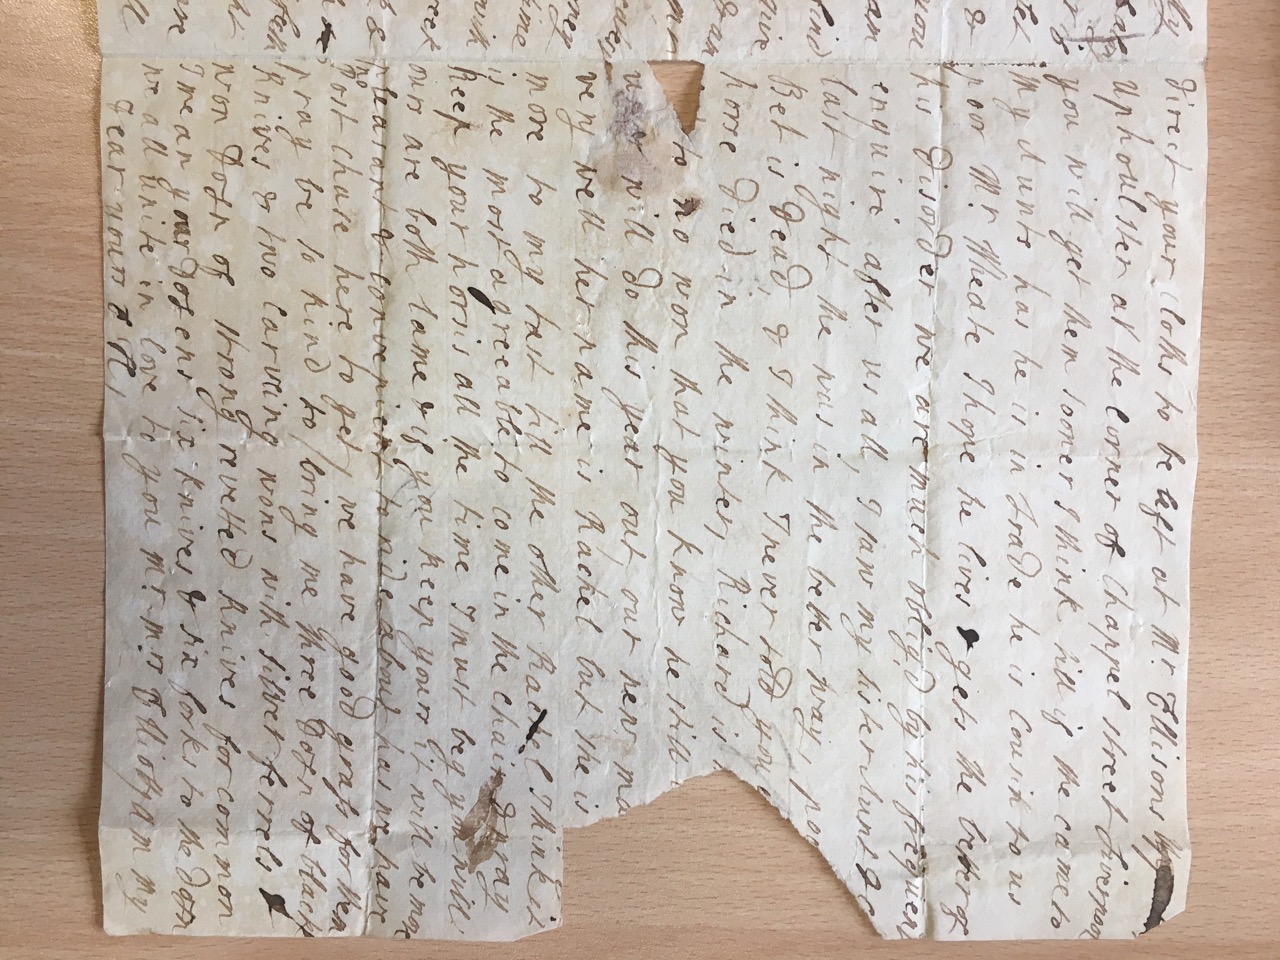 Image #3 of letter: Ellin Hesketh to Ann Hare, 19 May 1769